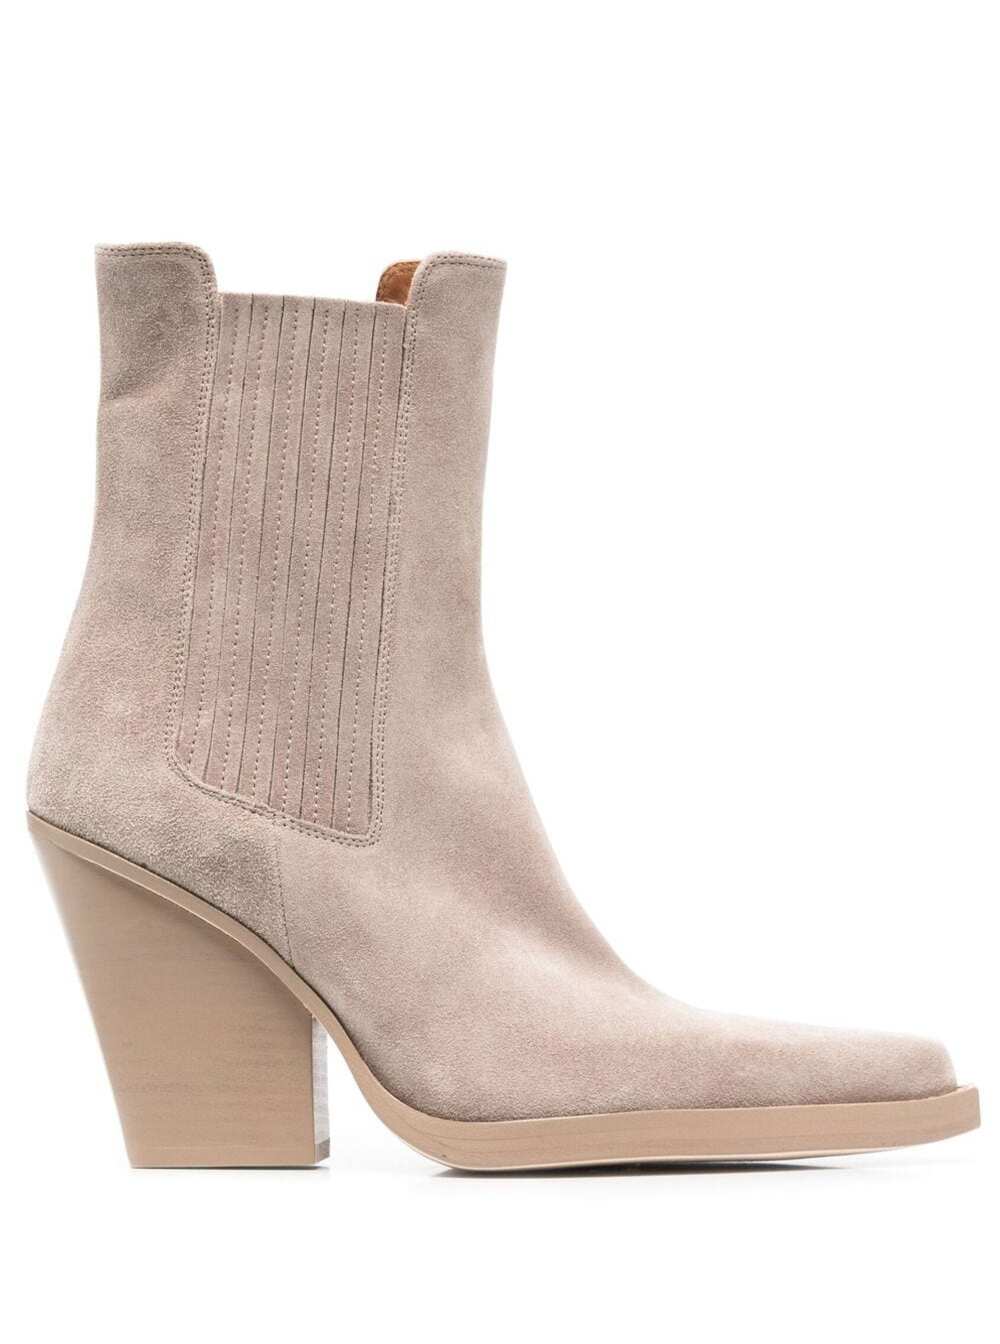 Paris Texas Beige Dallas Ankle Boot In Calf Suede With Logo Detail On The Insole And 10.5cm Wide Heel